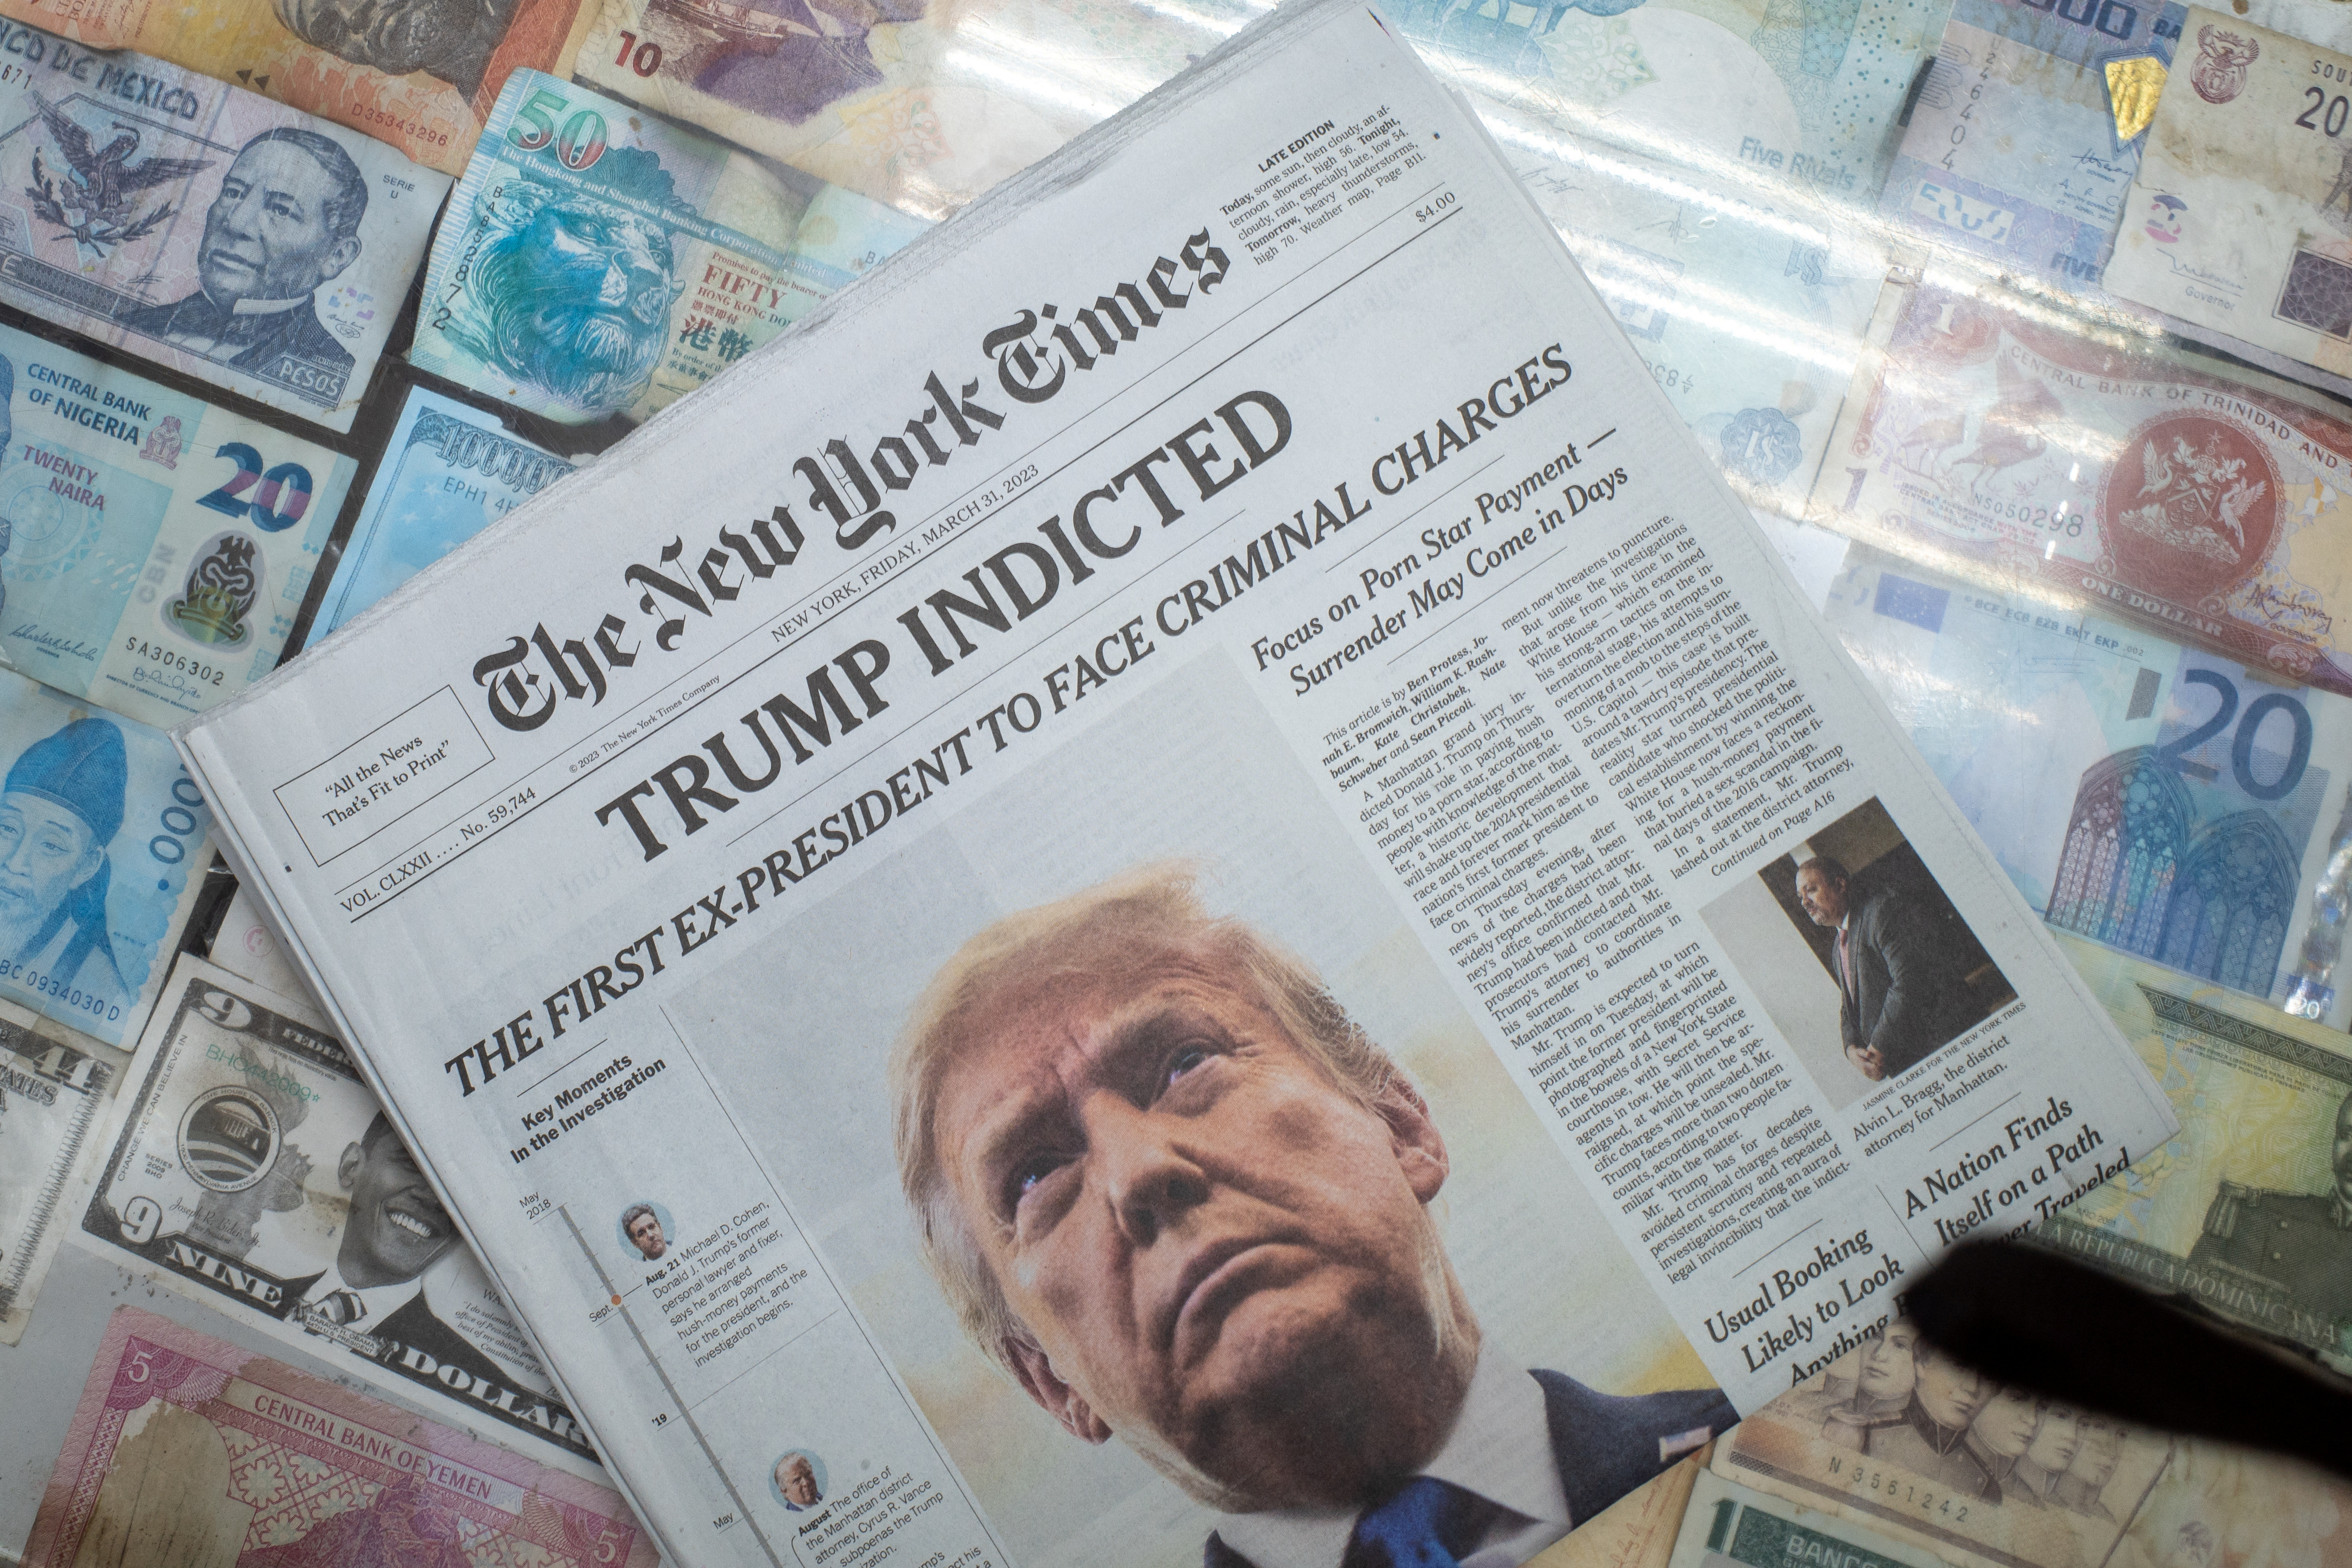 A New York Times newspaper is displayed at a newsstand following former U.S. President Donald Trump's indictment by a Manhattan grand jury following a probe into hush money paid to porn star Stormy Daniels, in New York City, U.S. March 31, 2023. REUTERS/David Dee Delgado